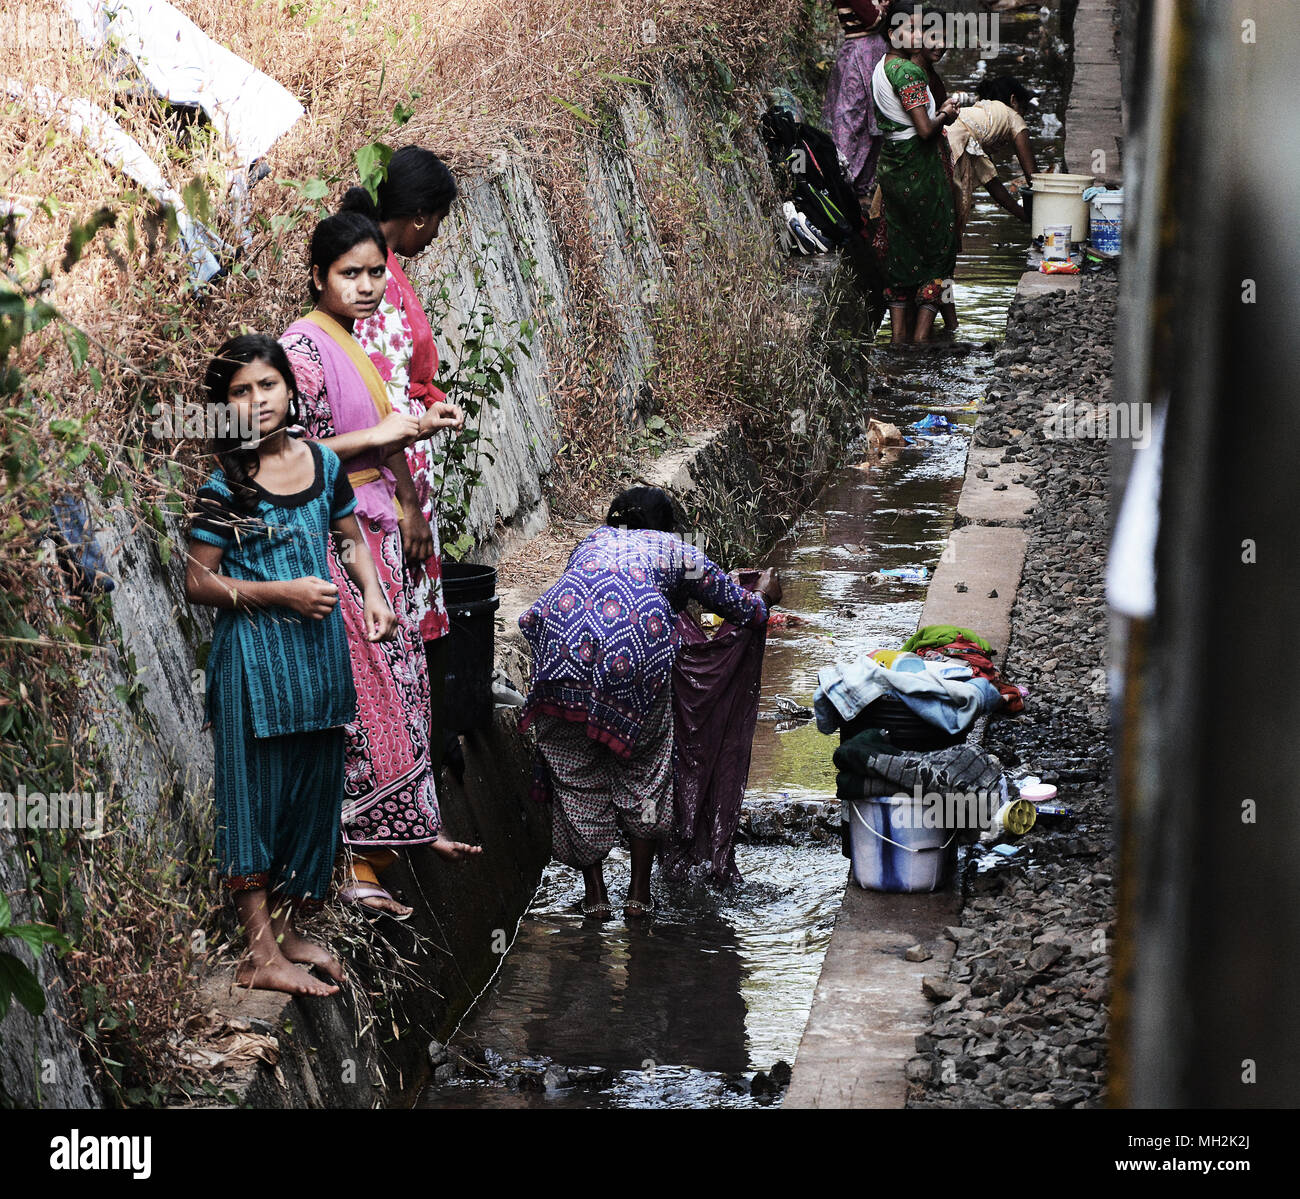 A group of women and girls washing the laundry in a gully full of water right alongside the railway tracks, India Stock Photo